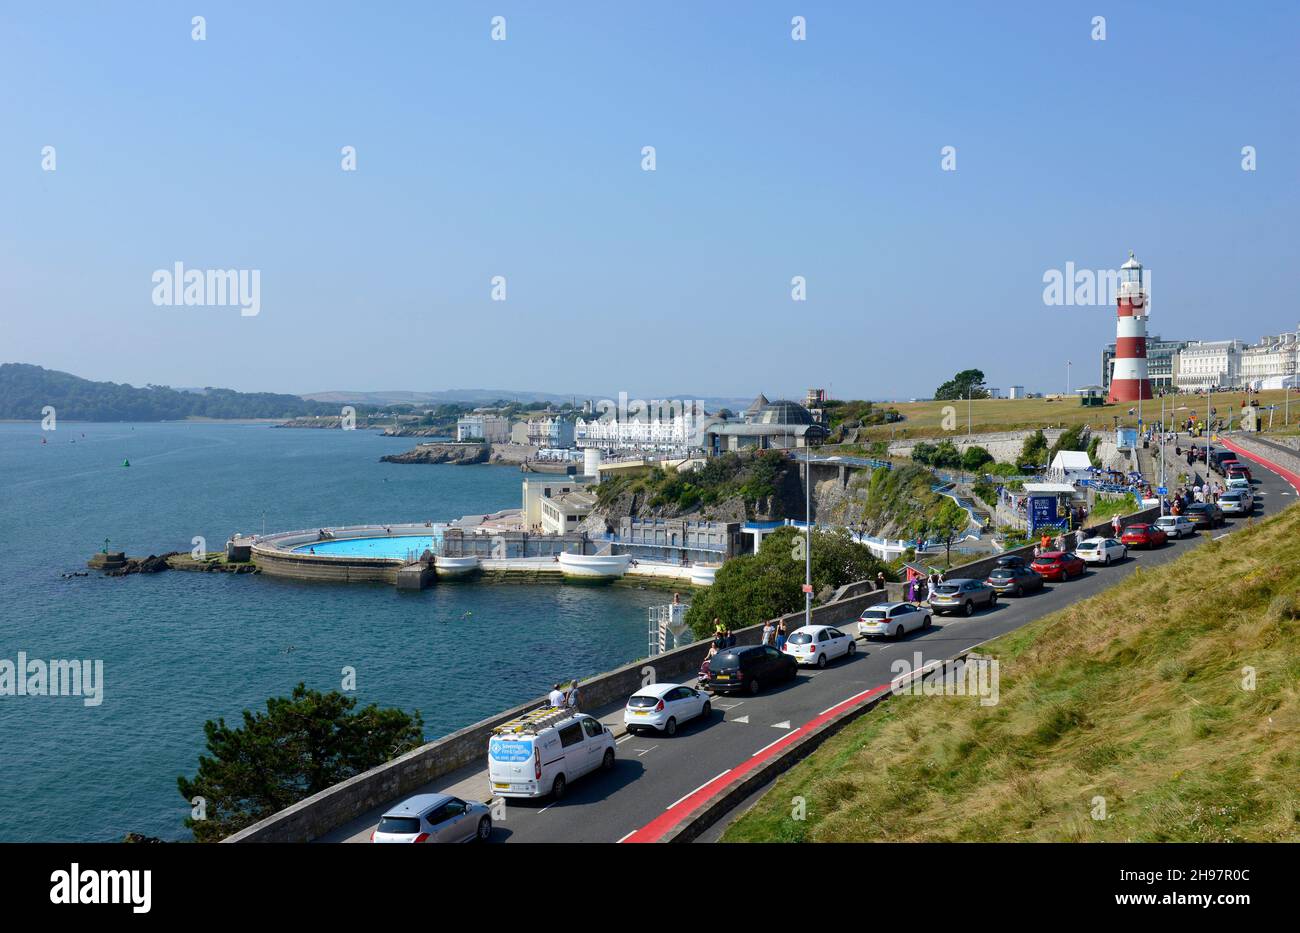 View of the seafront at Plymouth, Devon, UK, with Smeaton's tower prominent. Stock Photo